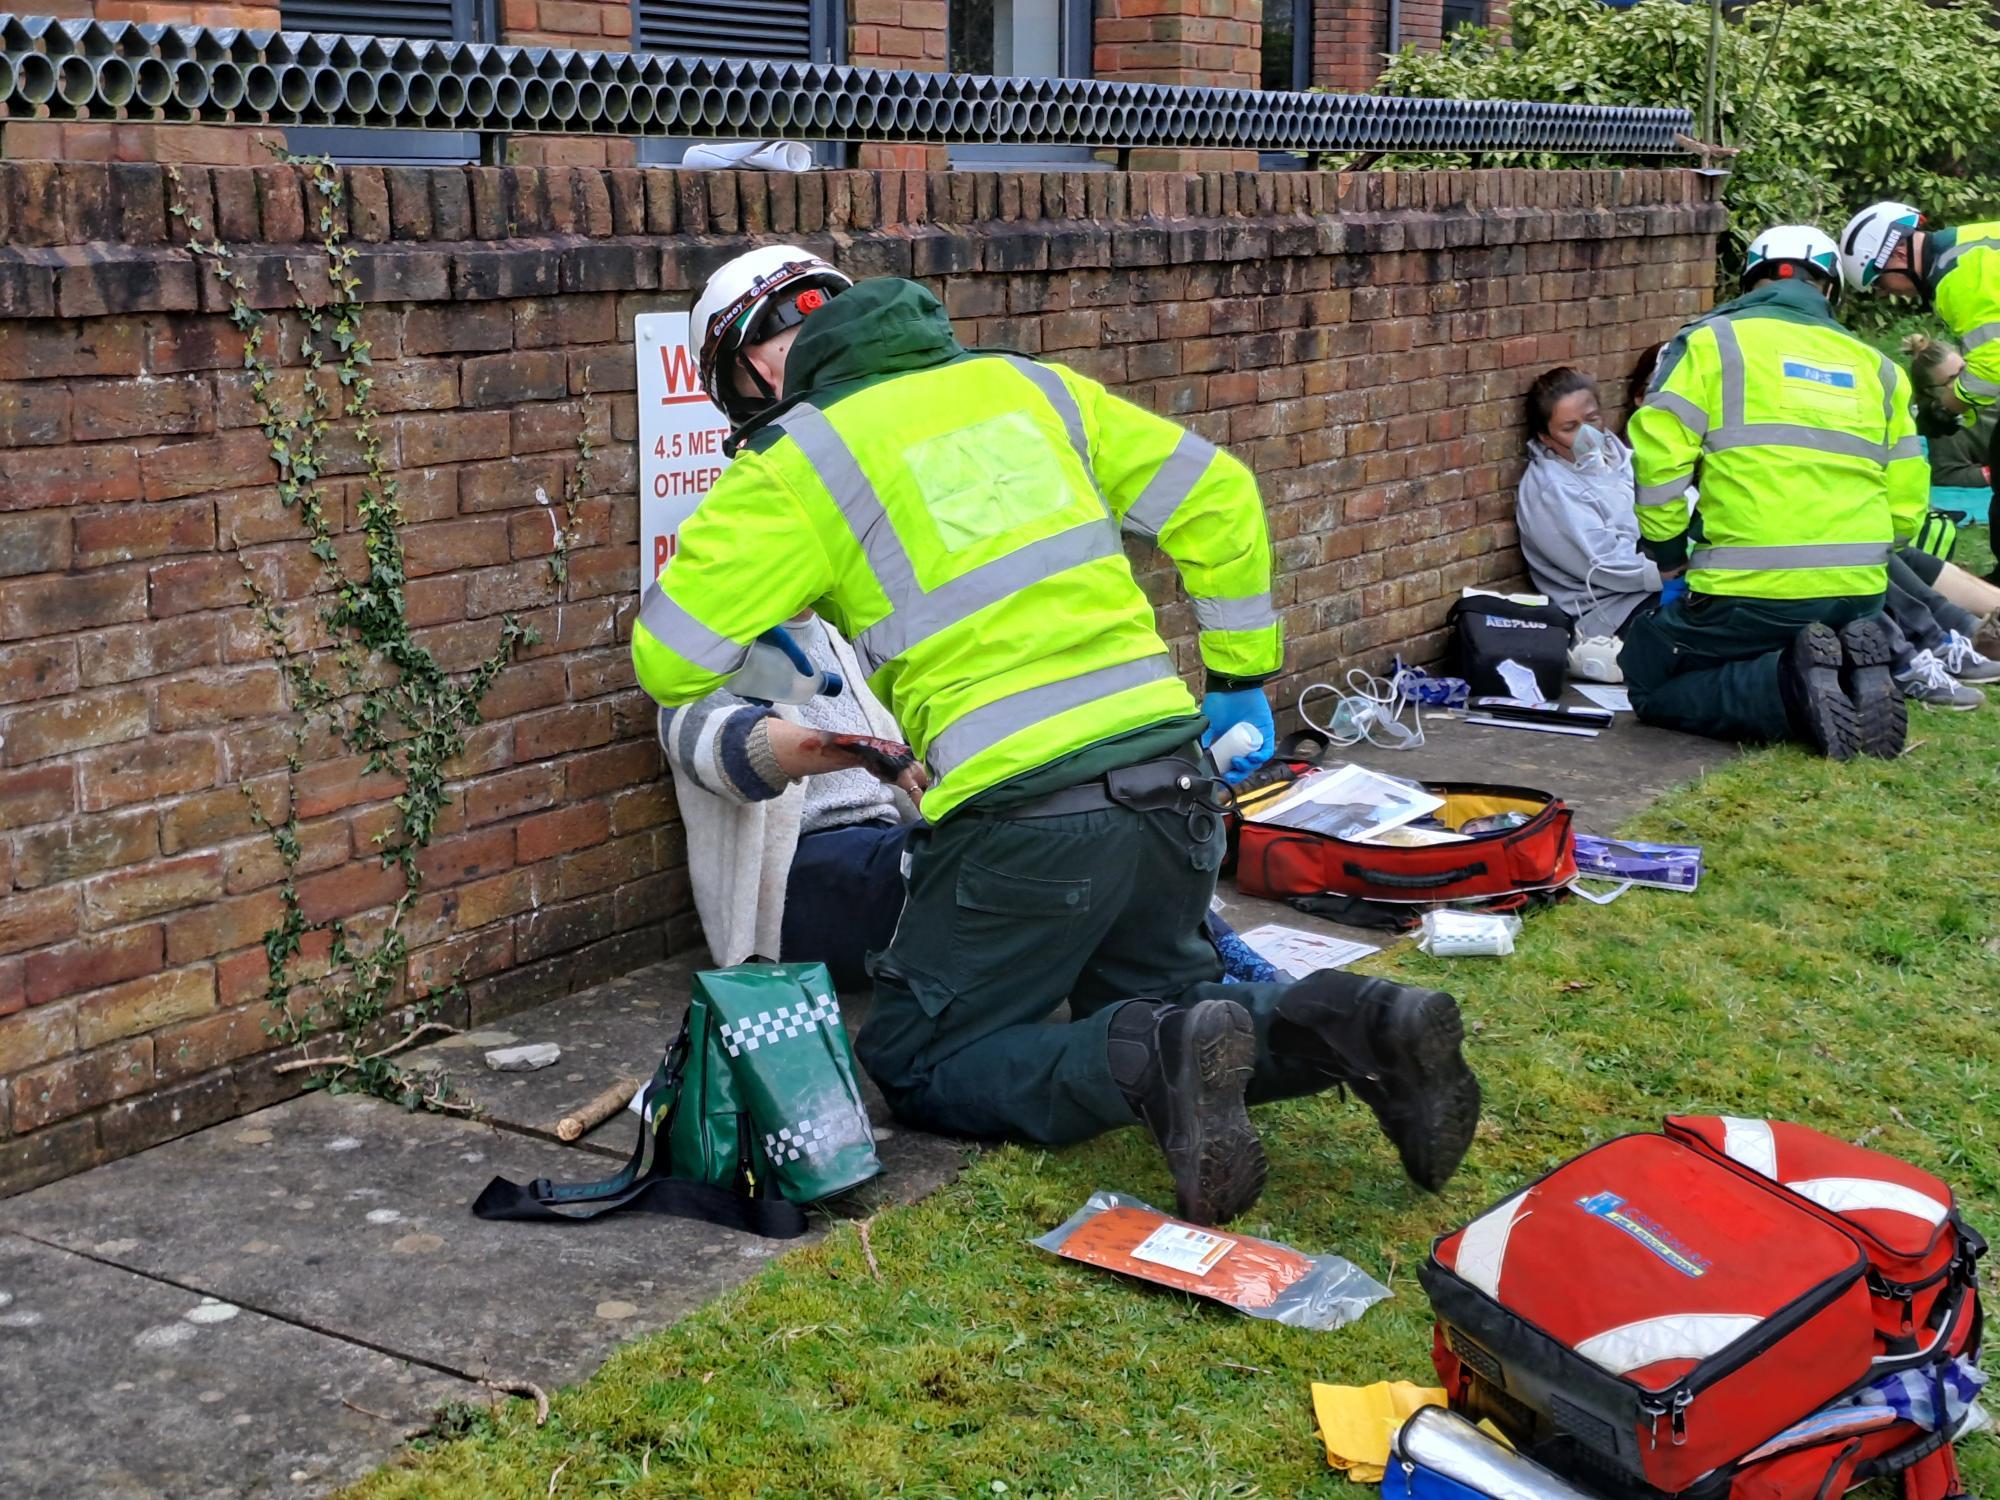 Casualties are treated by paramedics at the site of the emergency exercise.